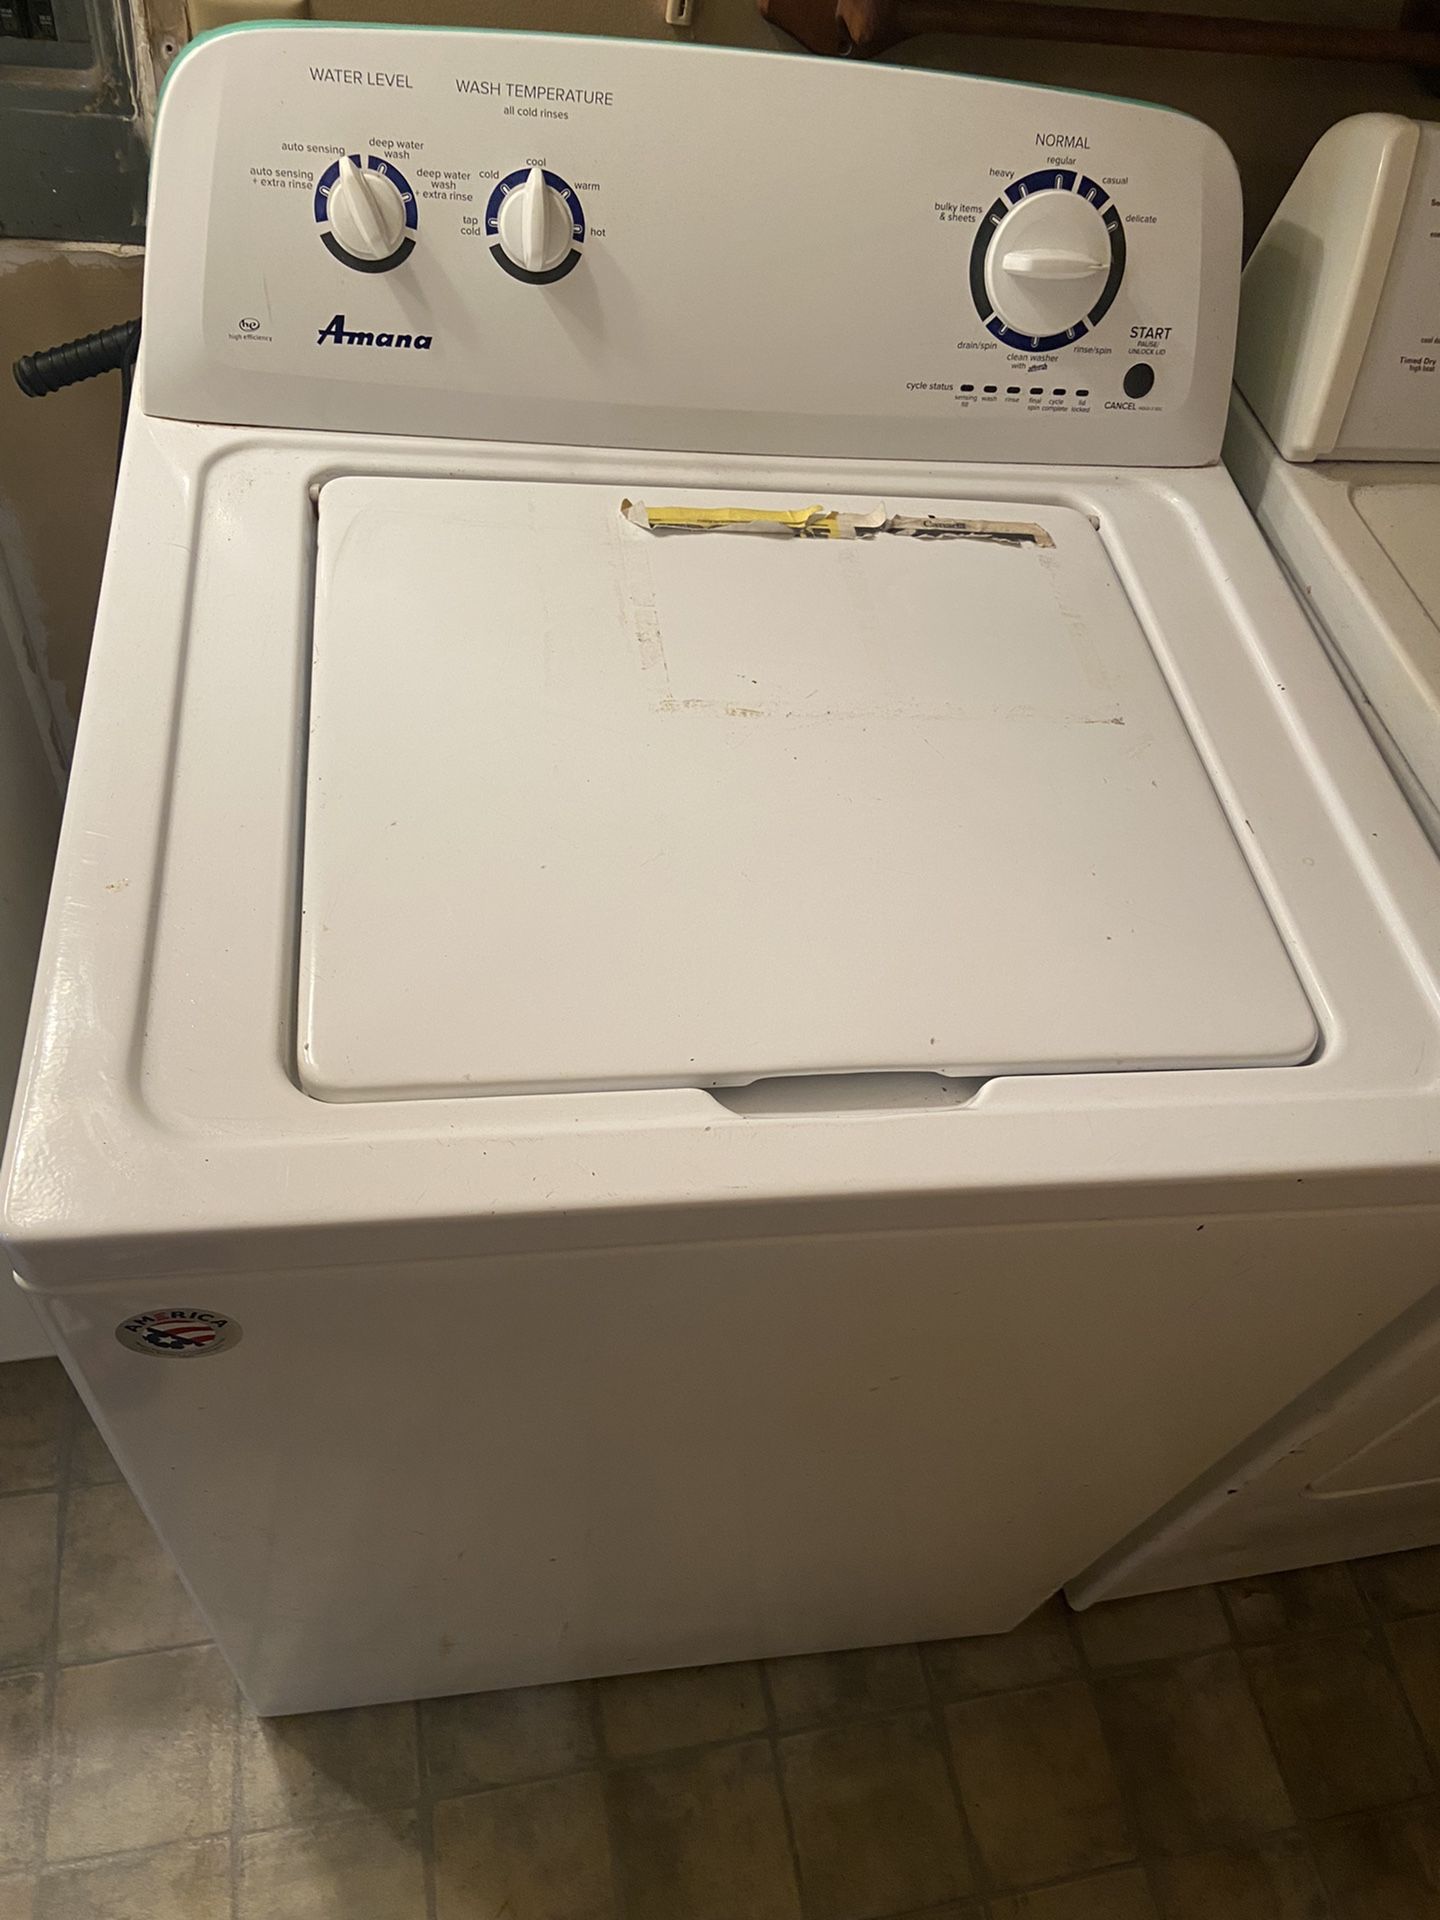 Washer And Dryer $150